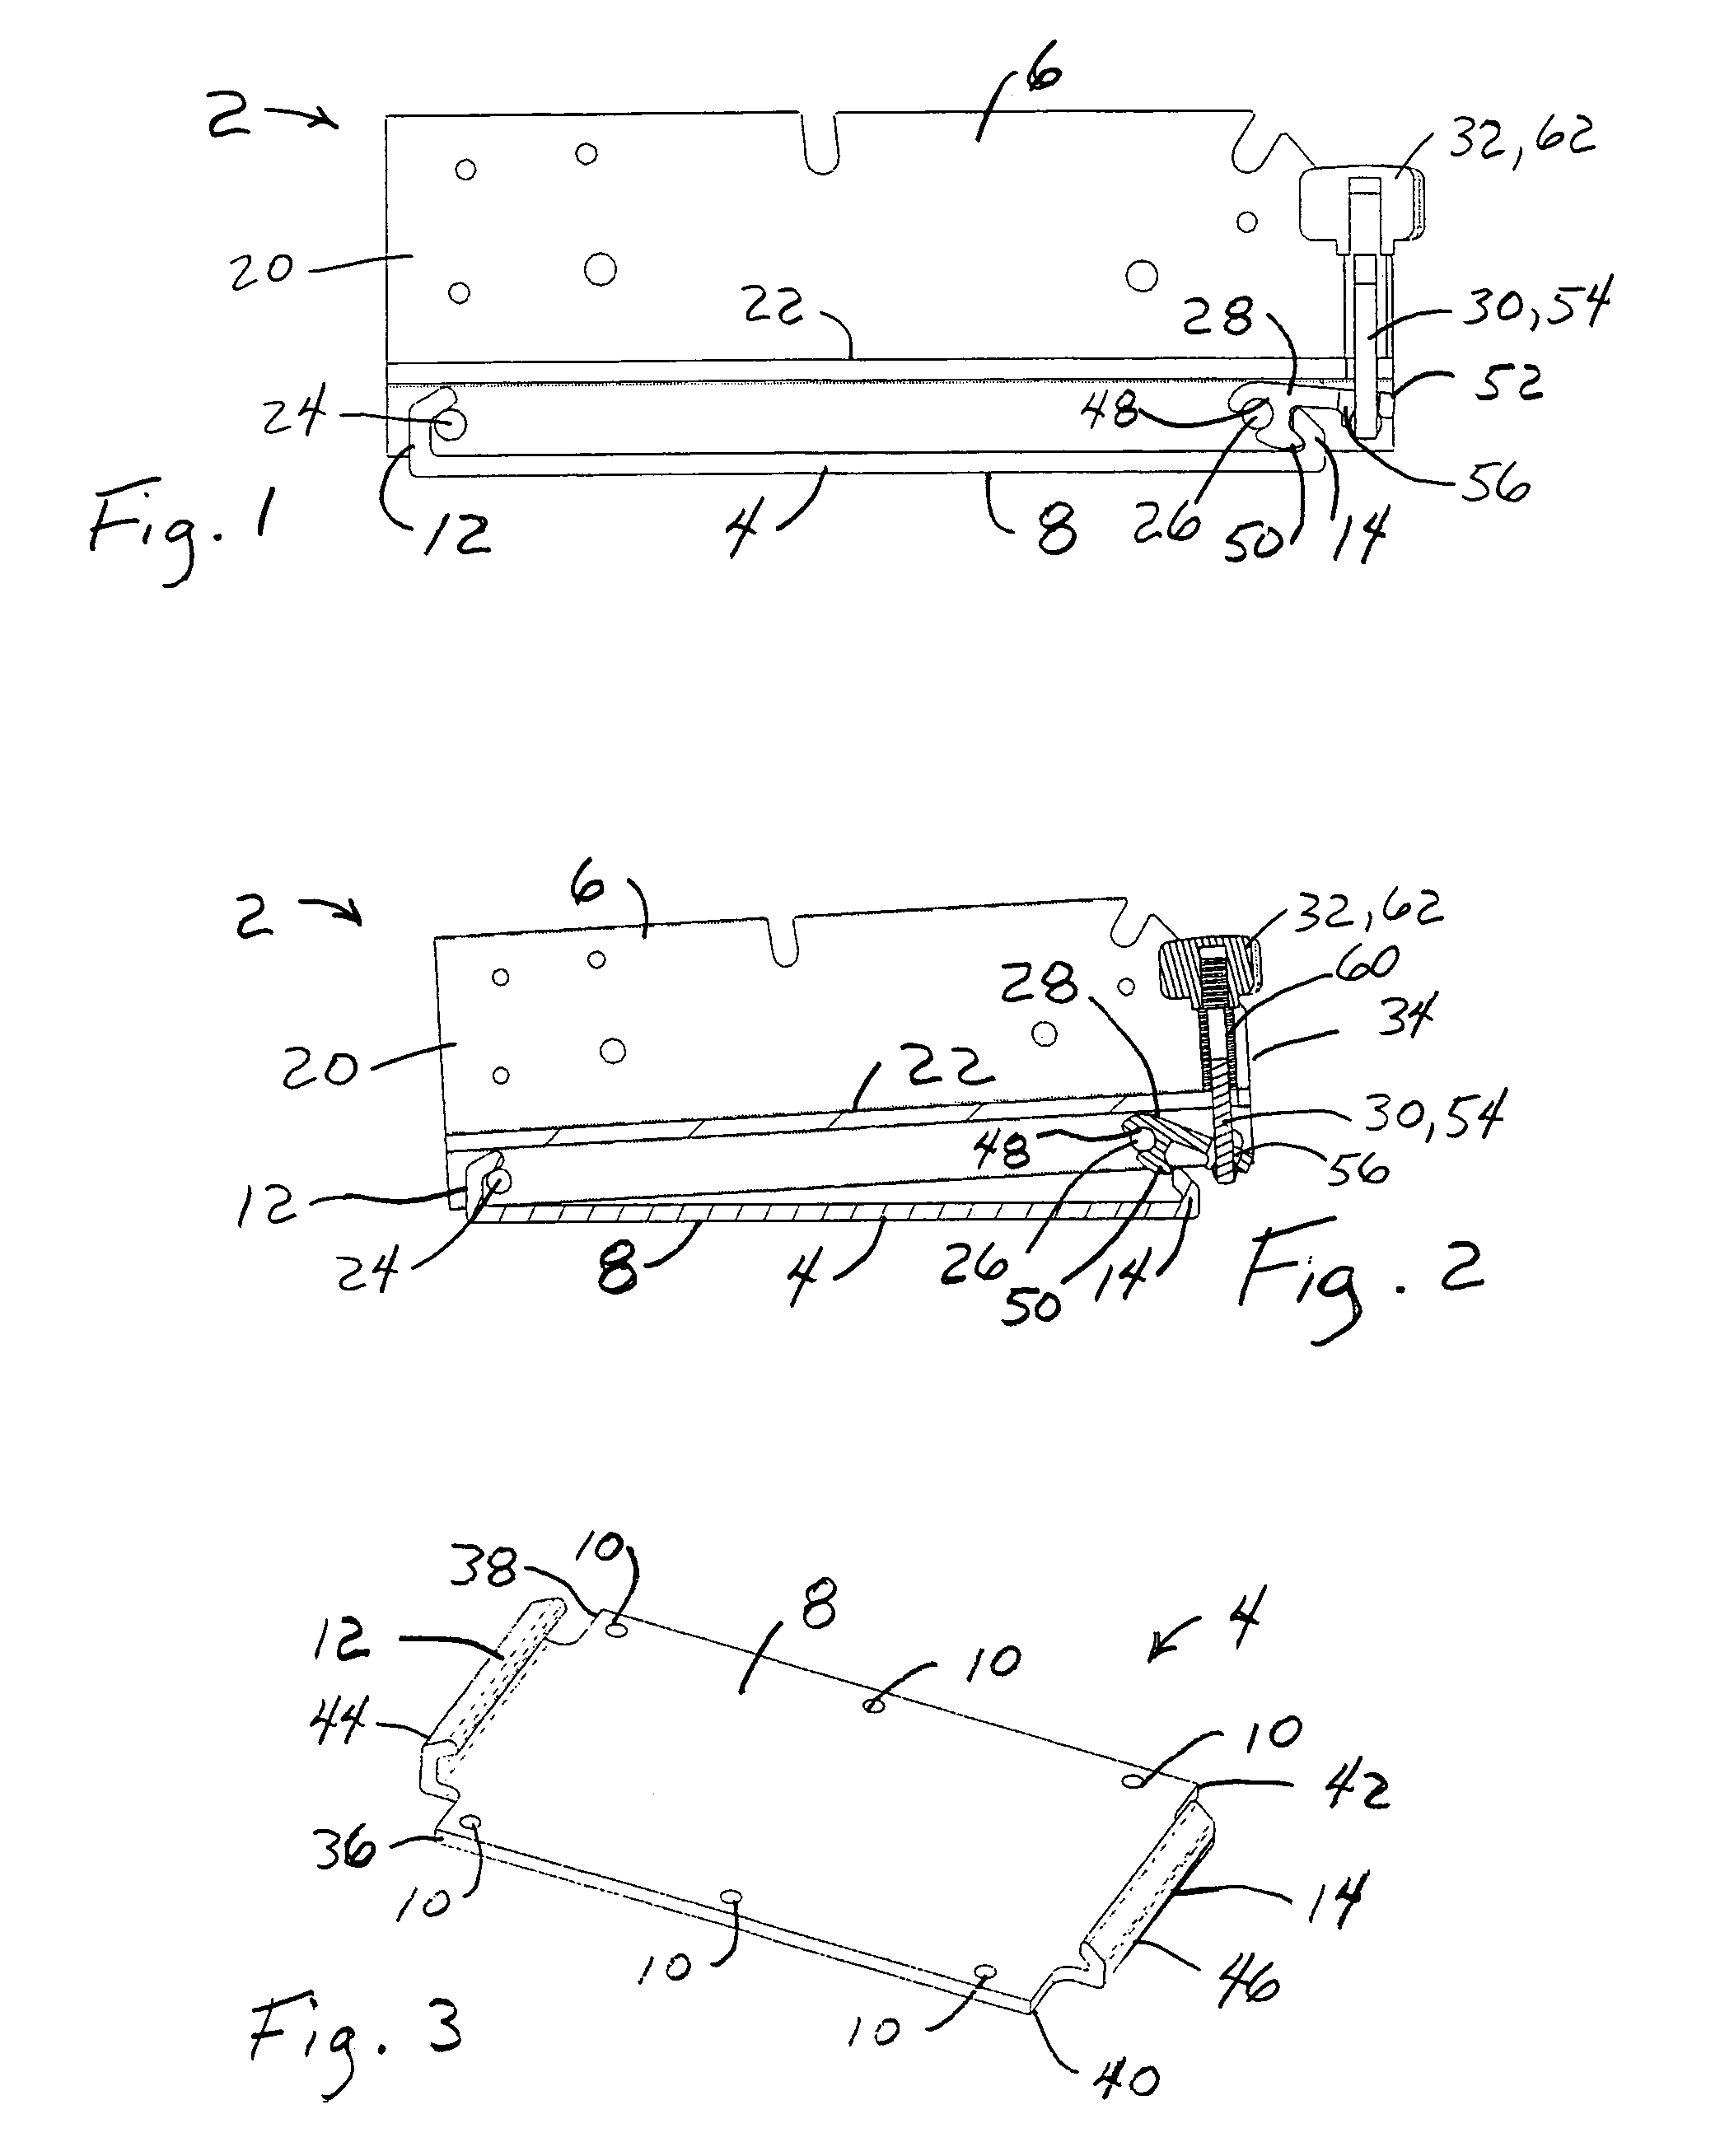 Releasable mounting apparatus and trolling motor assembly